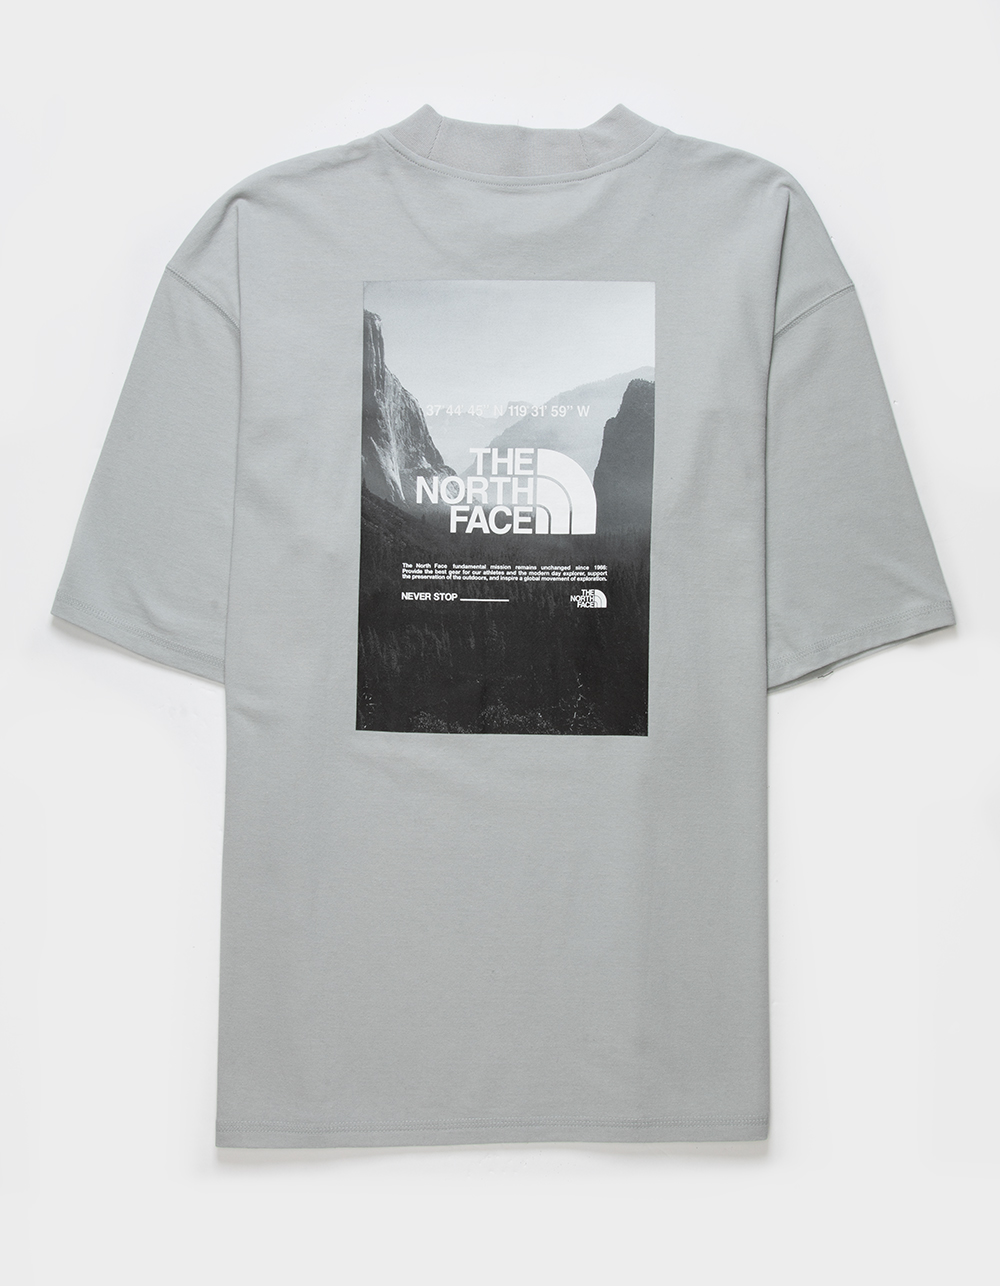 THE NORTH FACE AXYS Mens Tee - LIGHT GRAY | Tillys